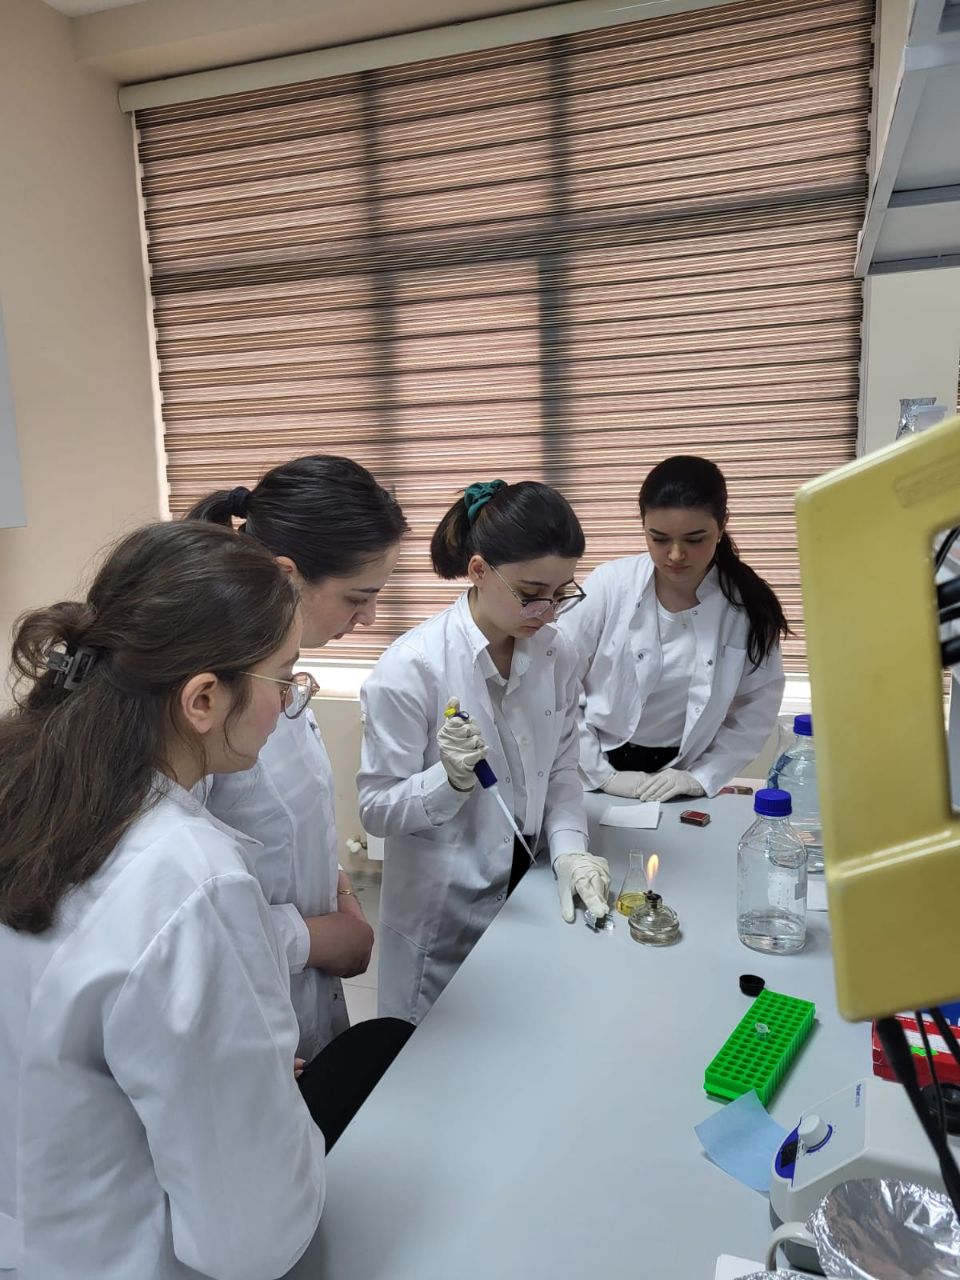 The students of Baku State University (BSU) have started their production internship at the Institute of Biophysics